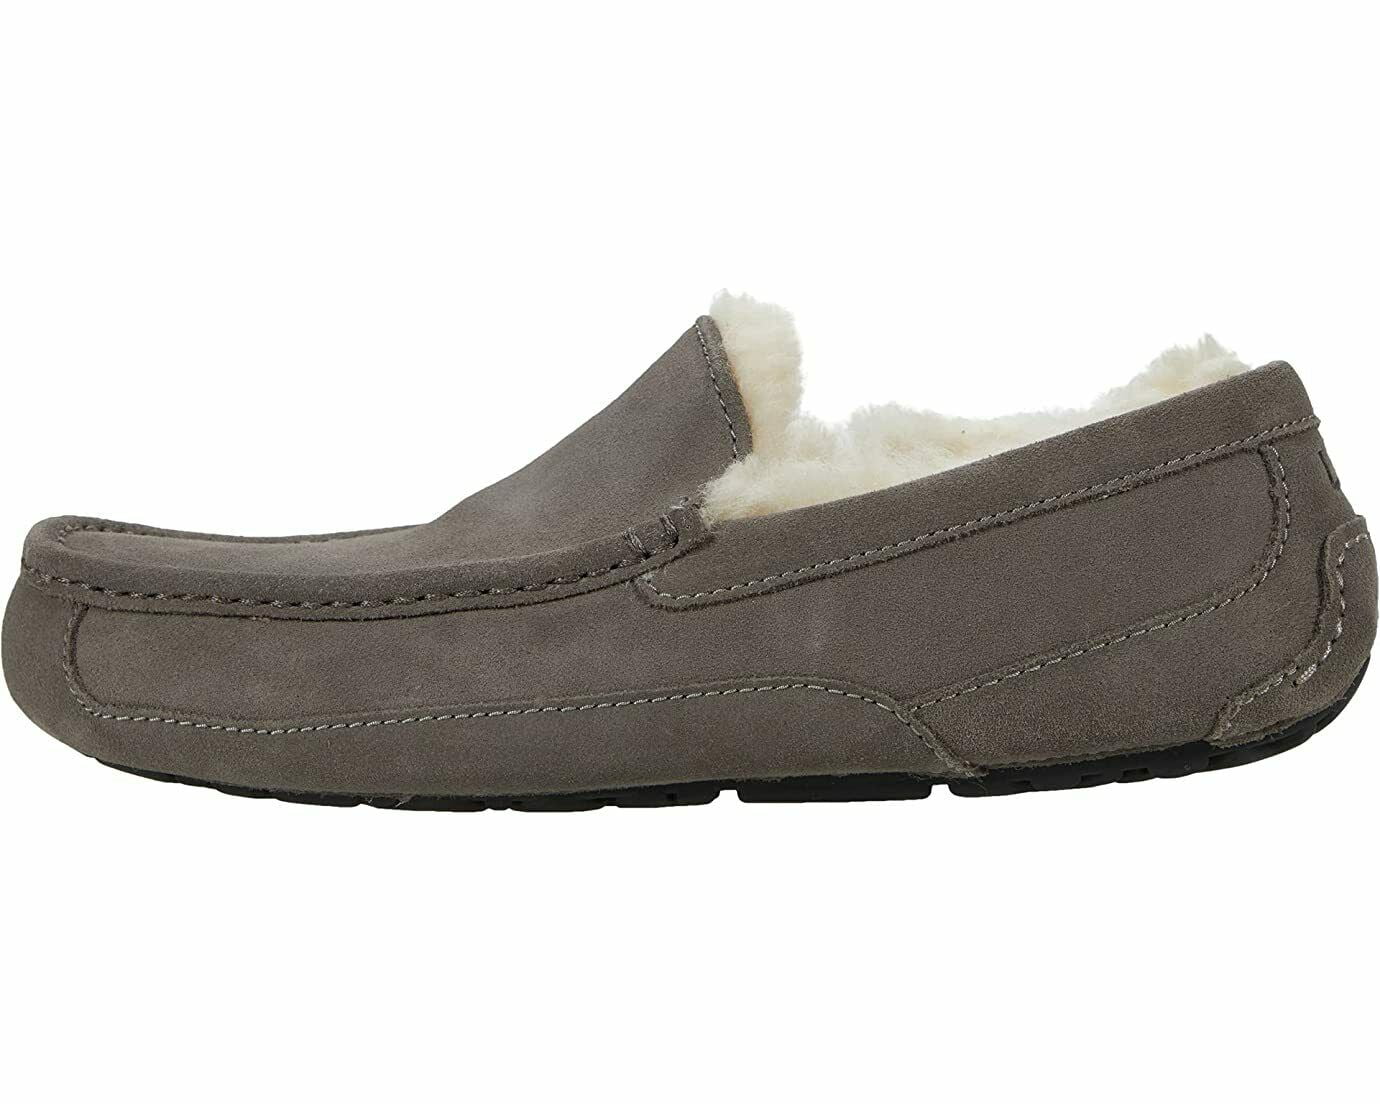 UGG Ascot Men's Casual Comfort Suede Slipper Loafers 1101110 